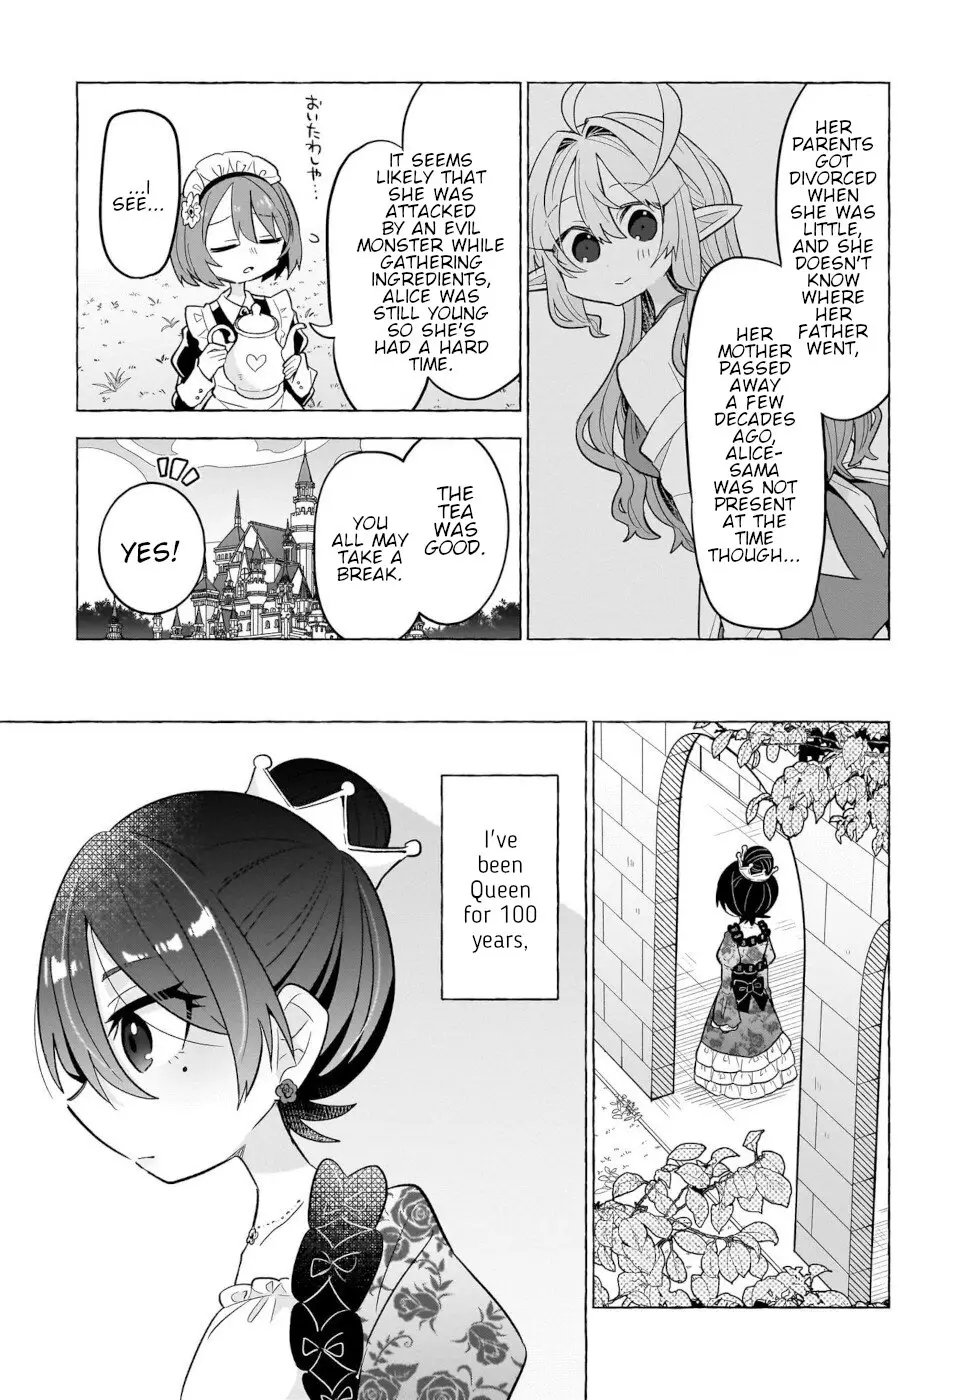 Sweets, Elf, And A High School Girl - 7 page 21-7f9855de